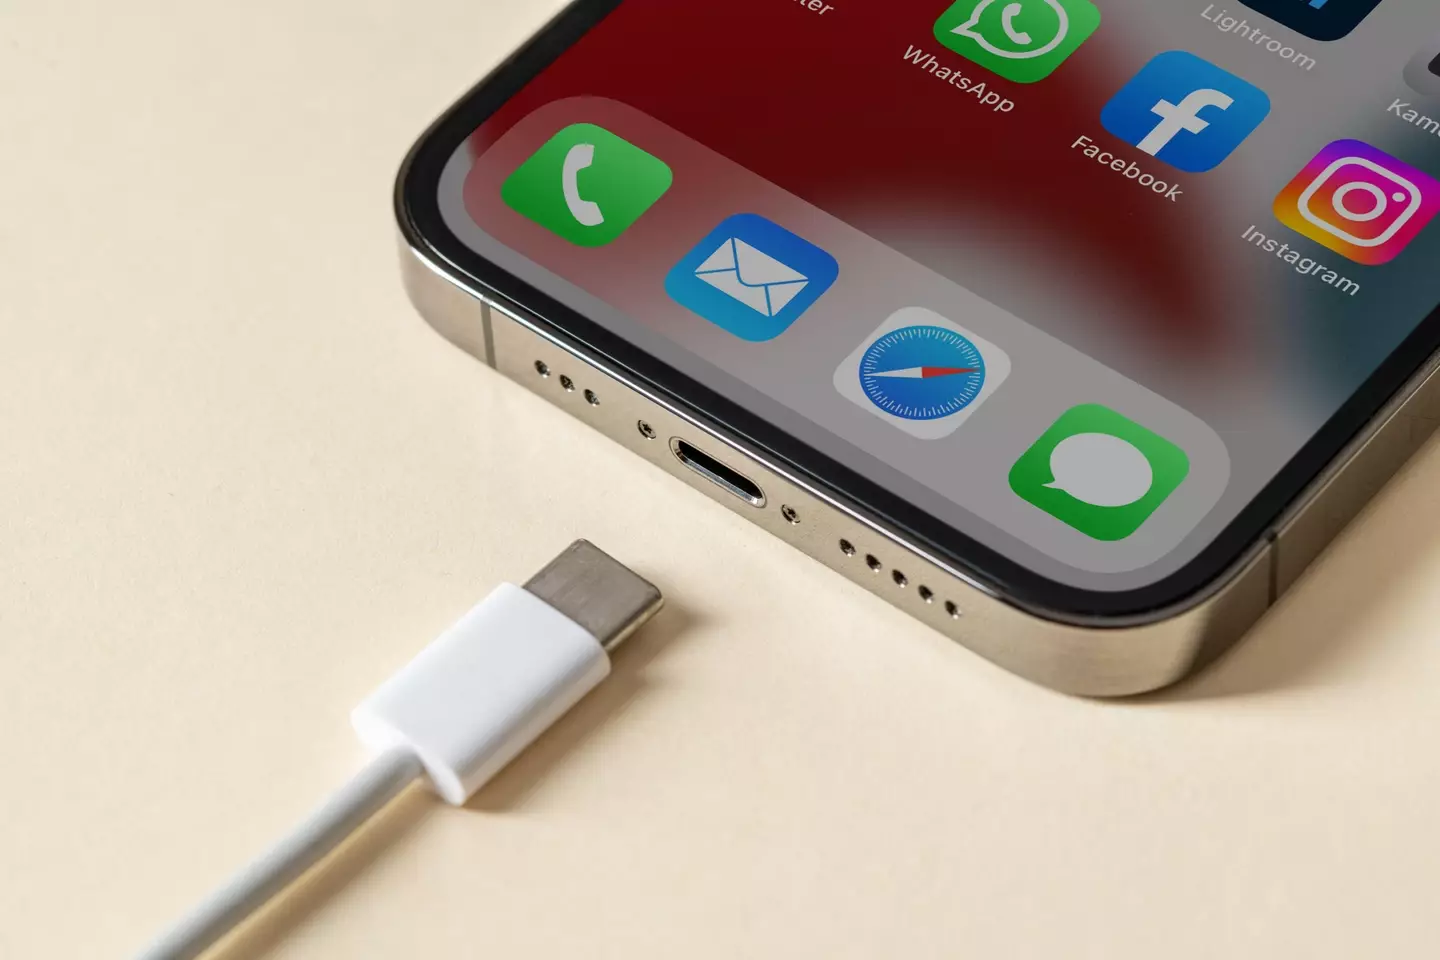 All technology companies will be required to adopt a USB-C cable under the new rule.